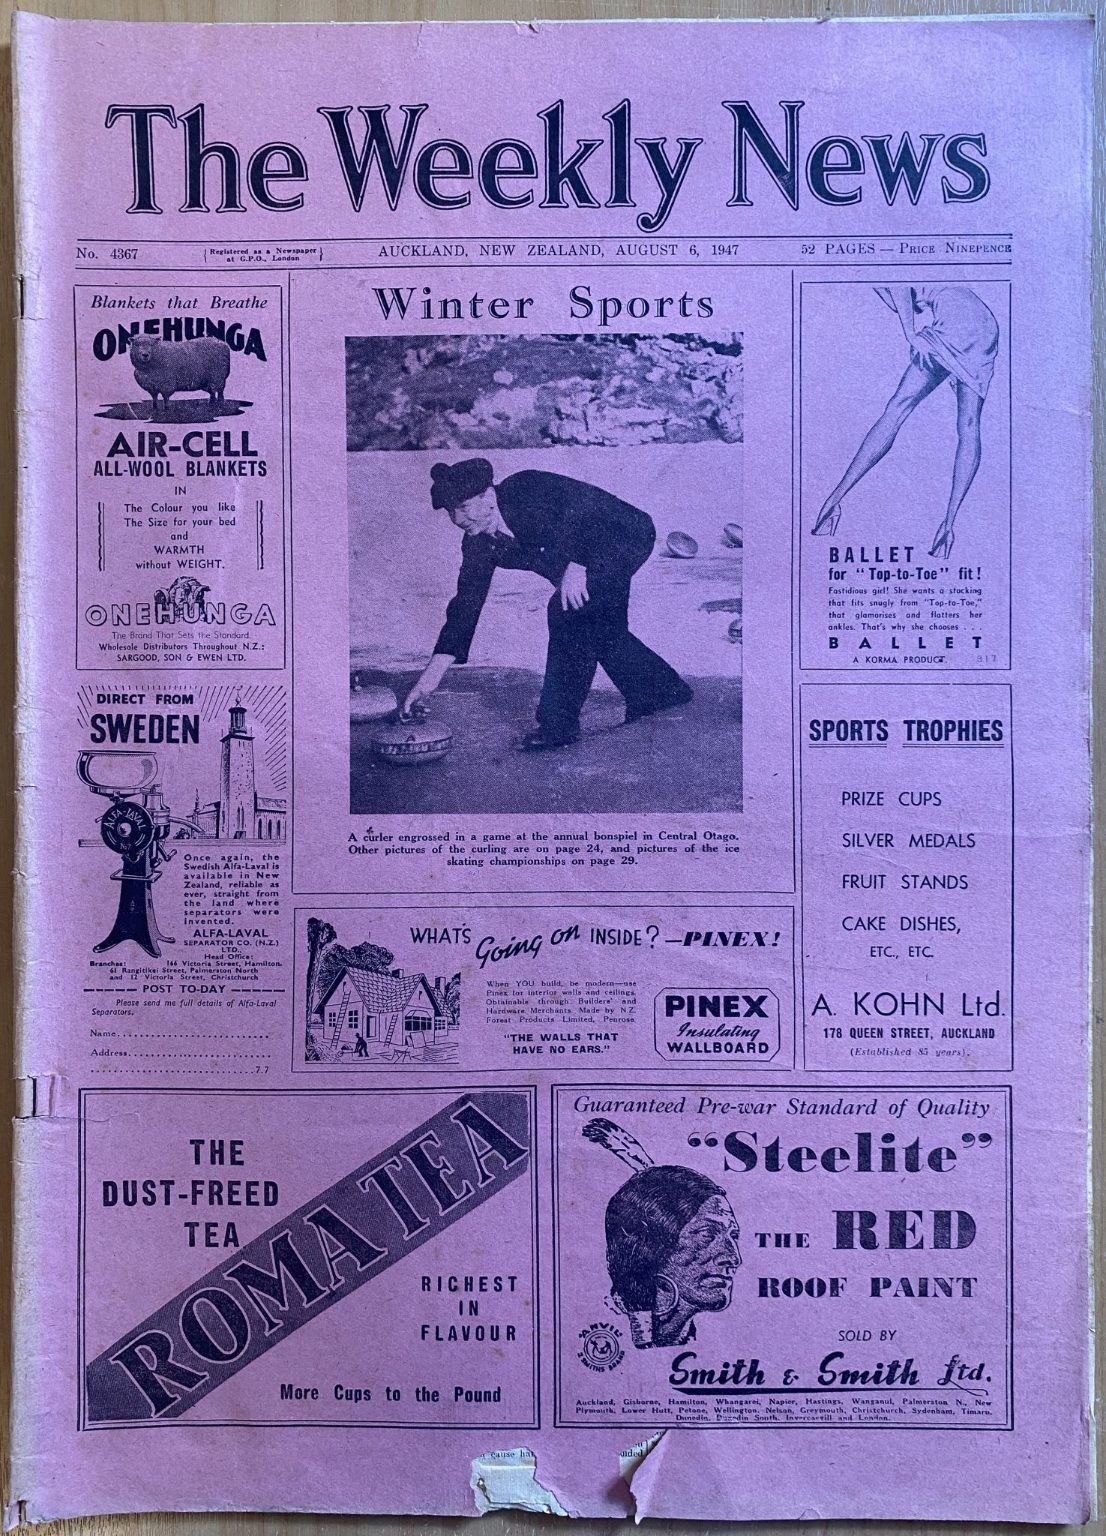 OLD NEWSPAPER: The Weekly News, No. 4367, 6 August 1947